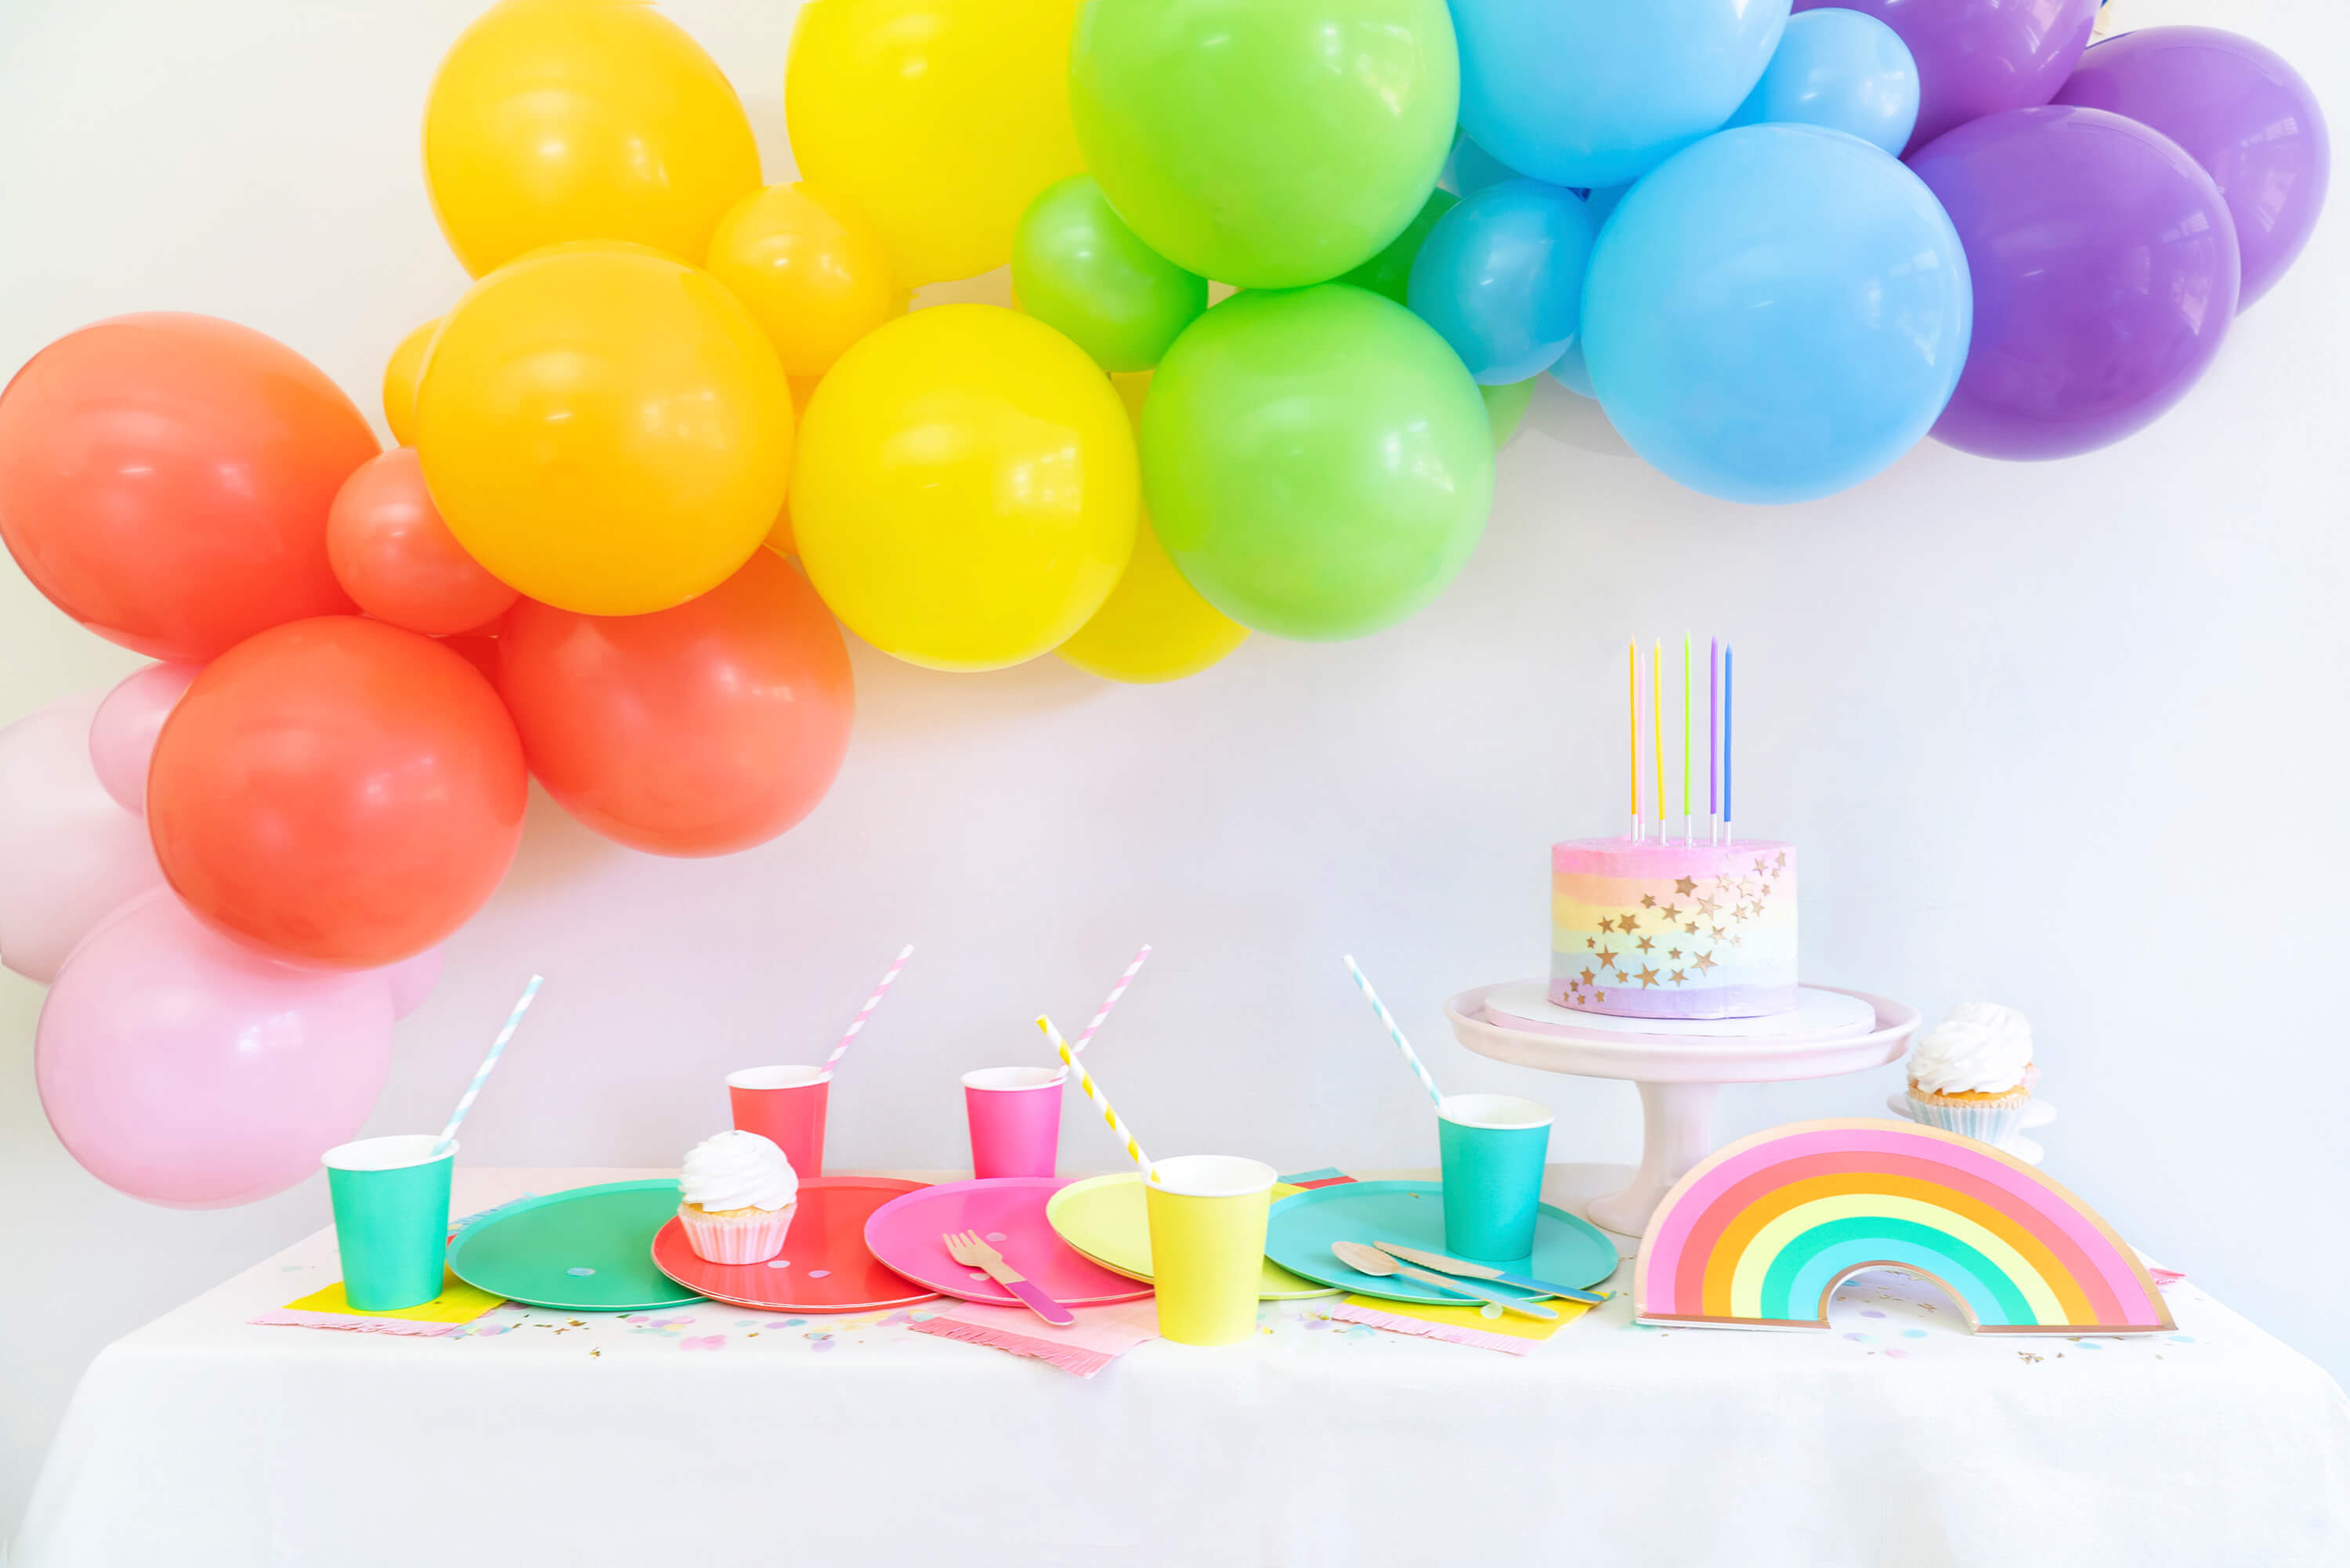 Pastel Rainbow Party partyware and party supplies